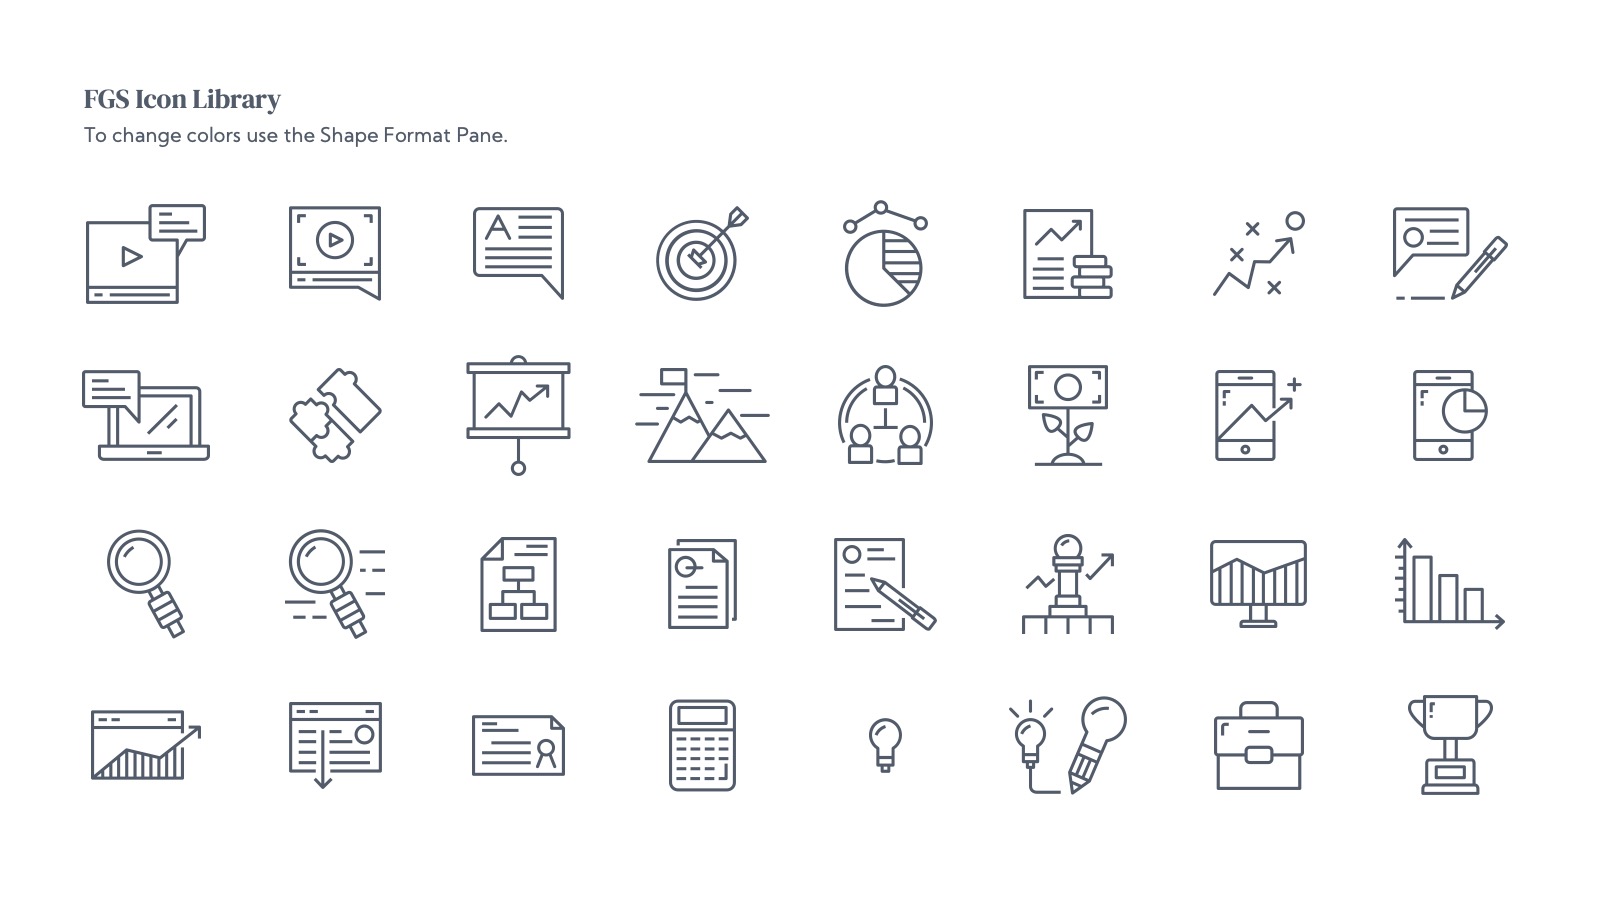 PPT Icons